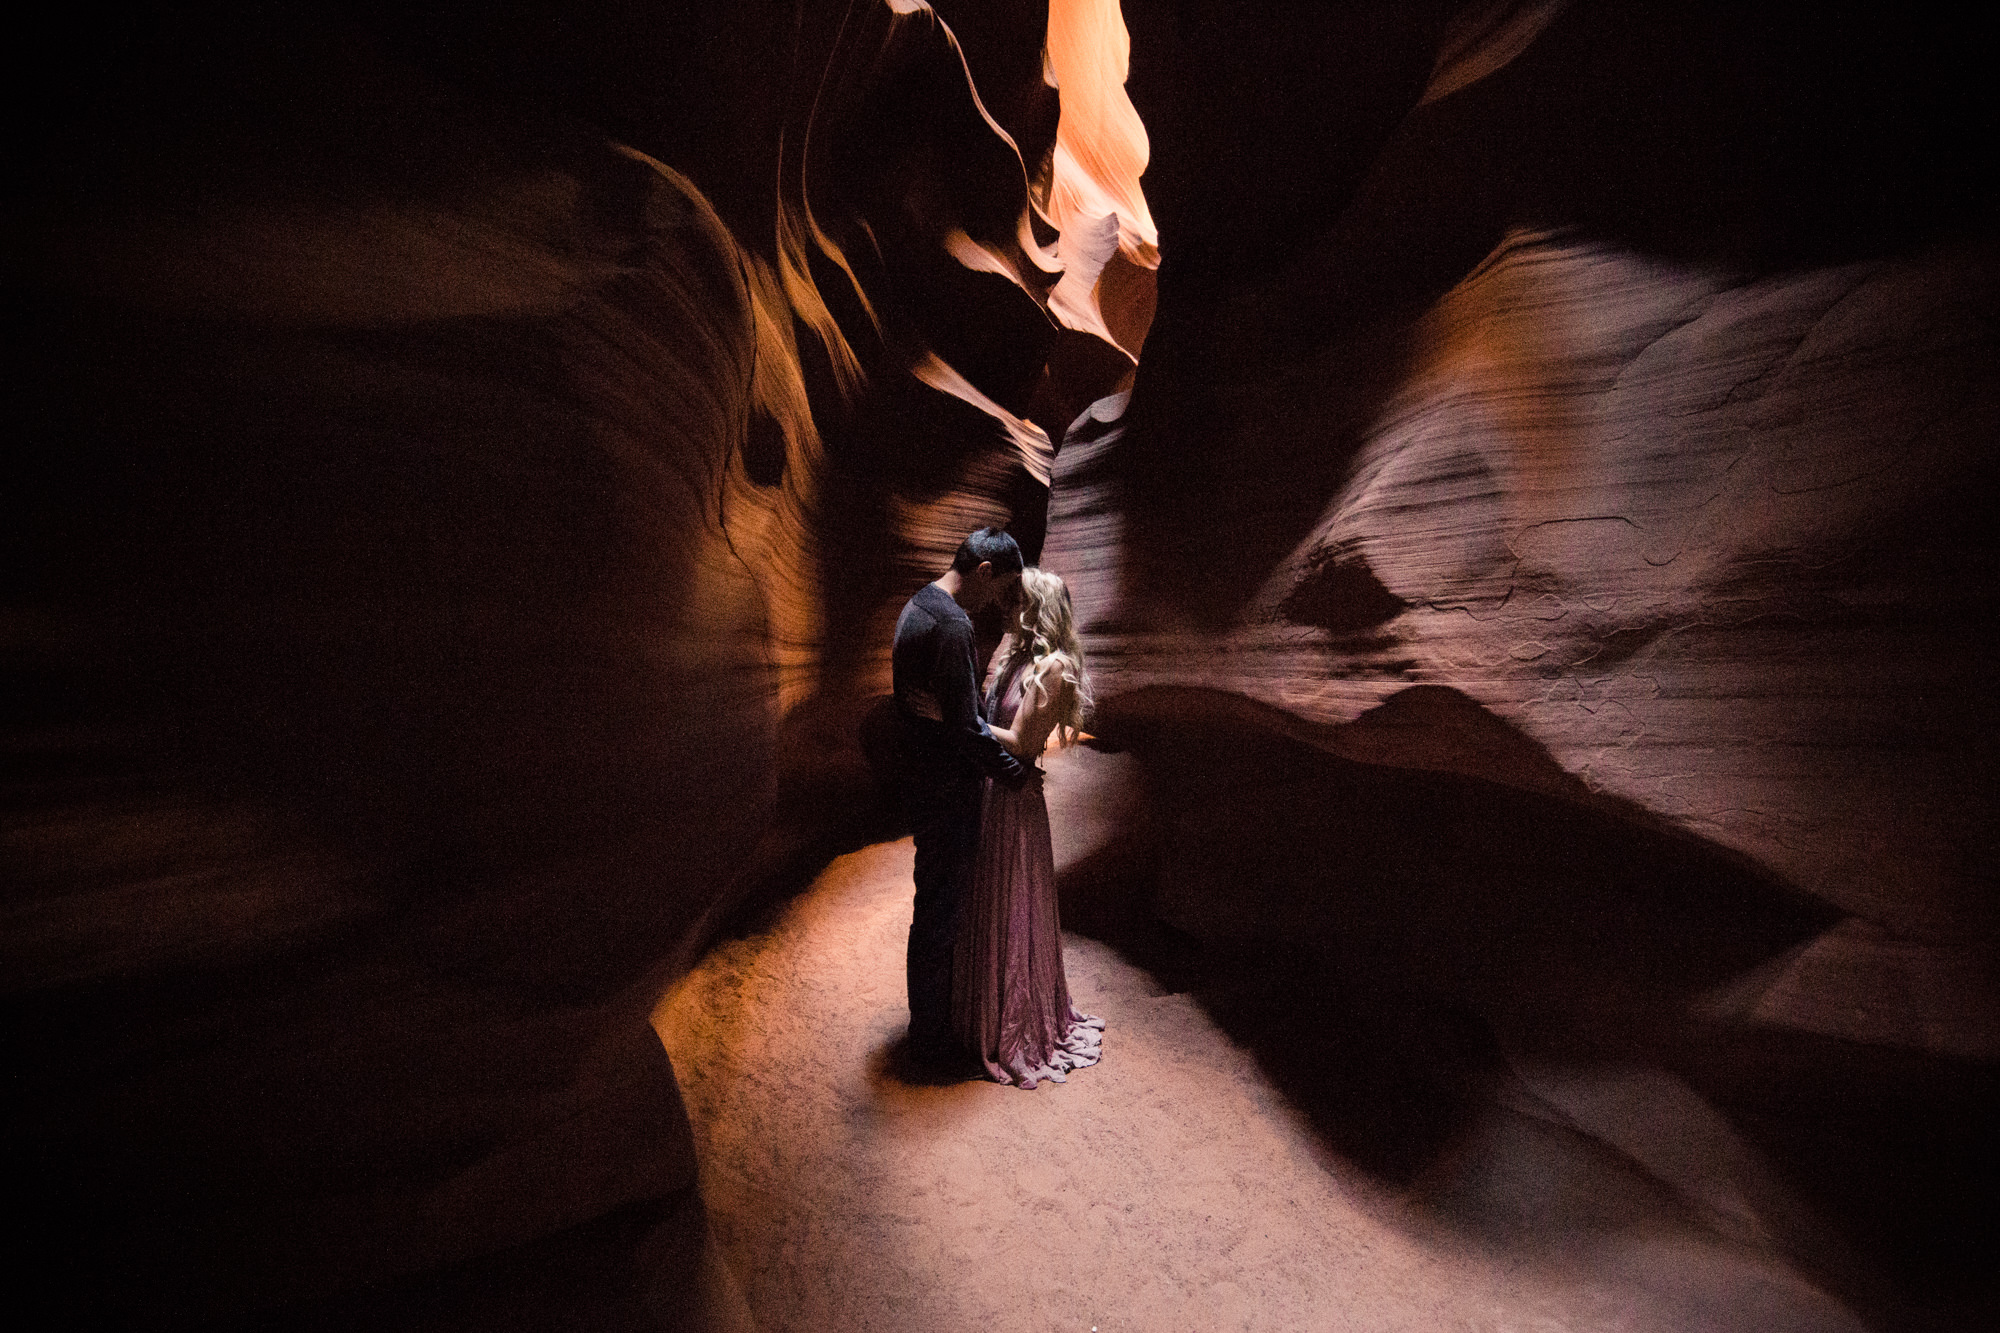 chelsea + jorge's day-after wedding adventure session in page, arizona | antelope canyon | adventure elopement photographer | the hearnes adventure photography | www.thehearnes.com